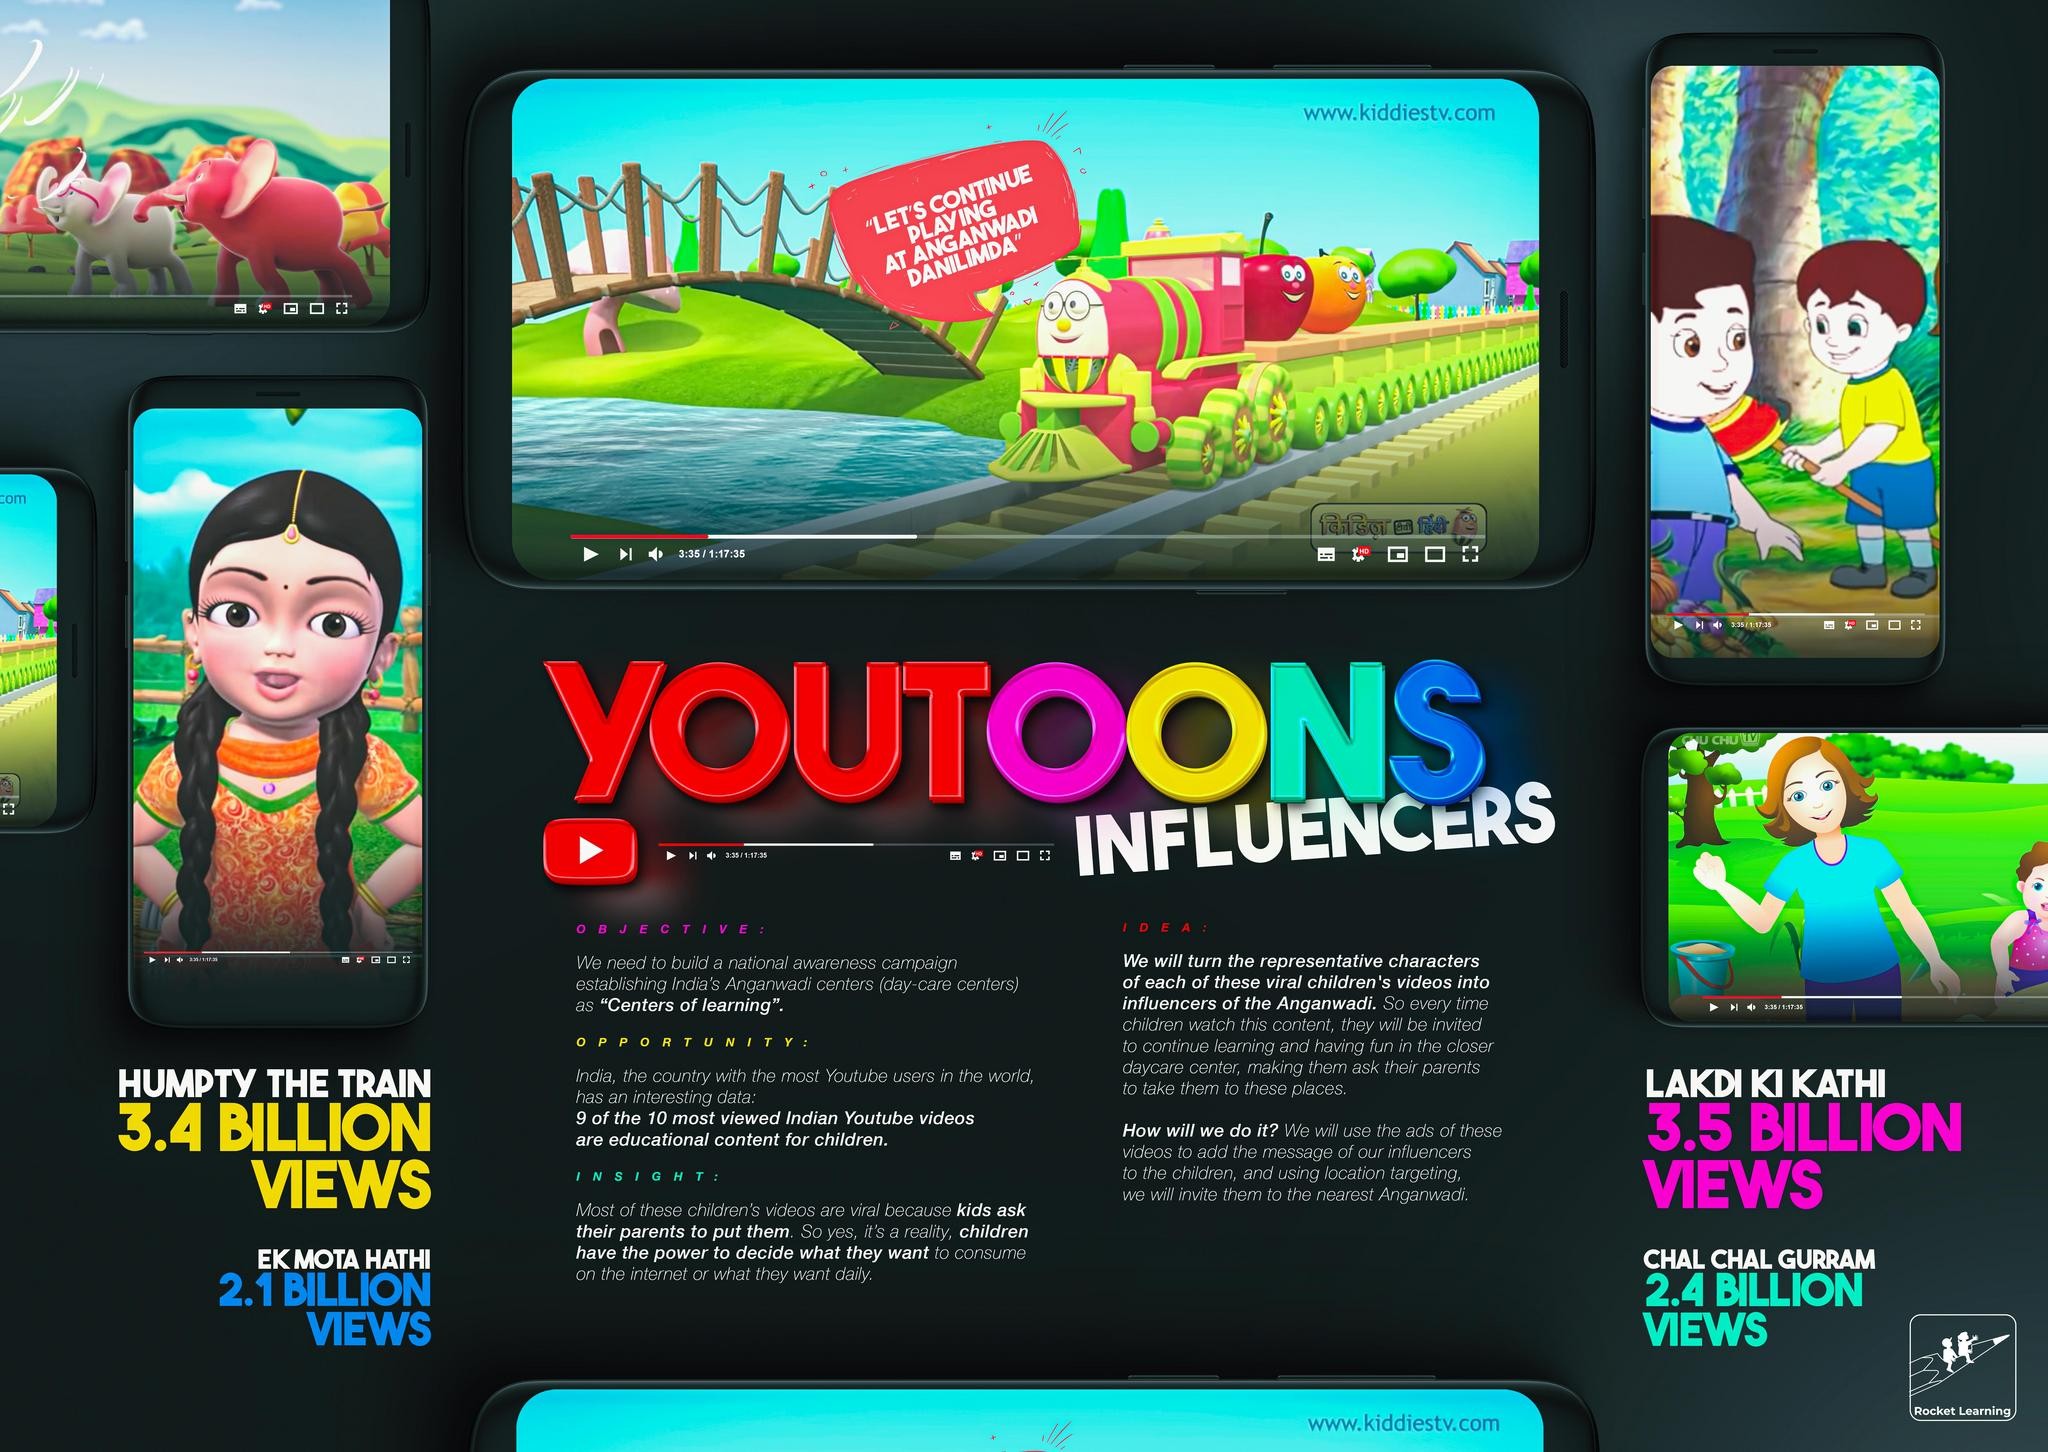 YouToons Influencers